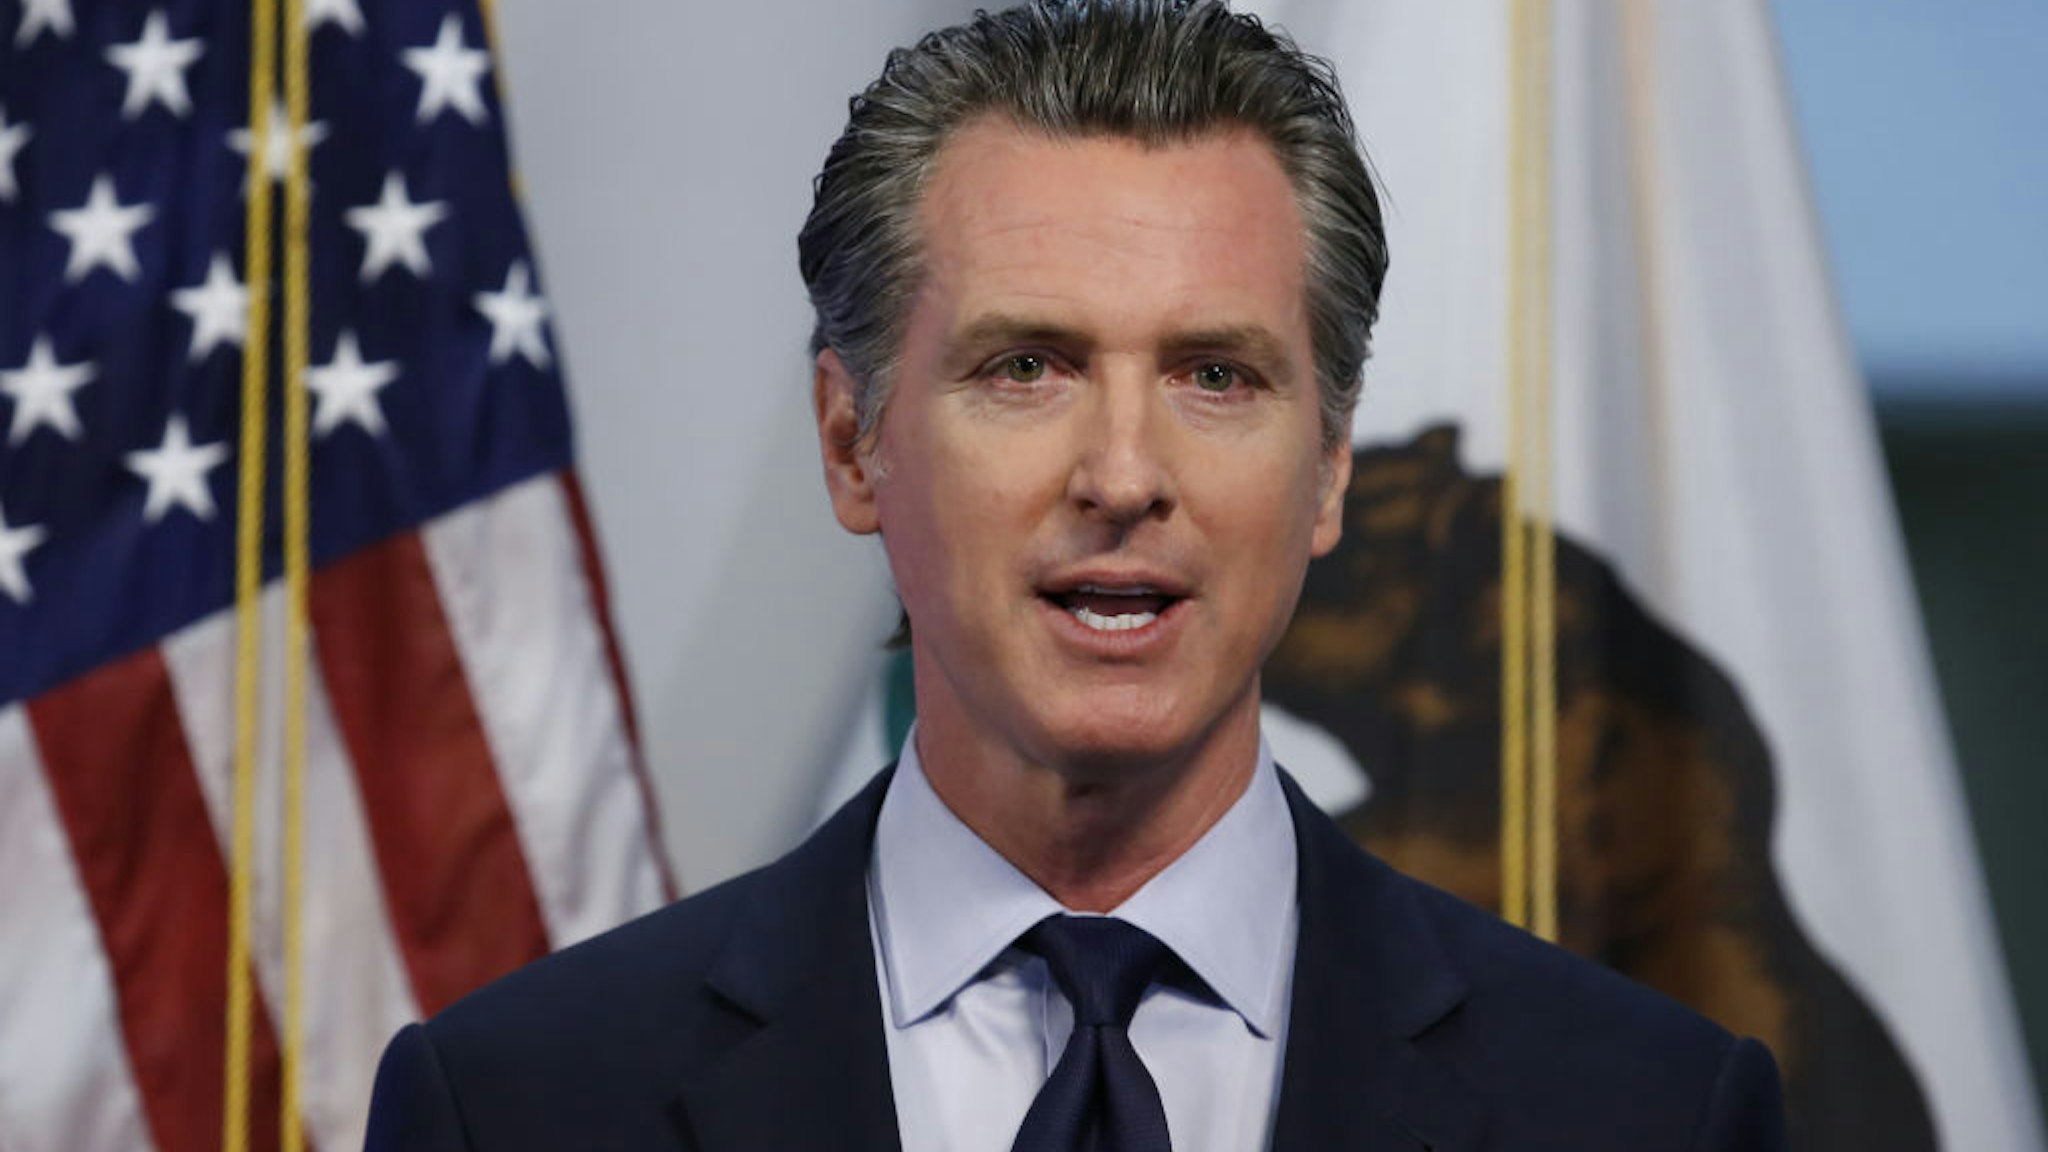 Gavin Newsom, governor of California, speaks during a news conference in Sacramento, California, U.S., on Tuesday, April 14, 2020.